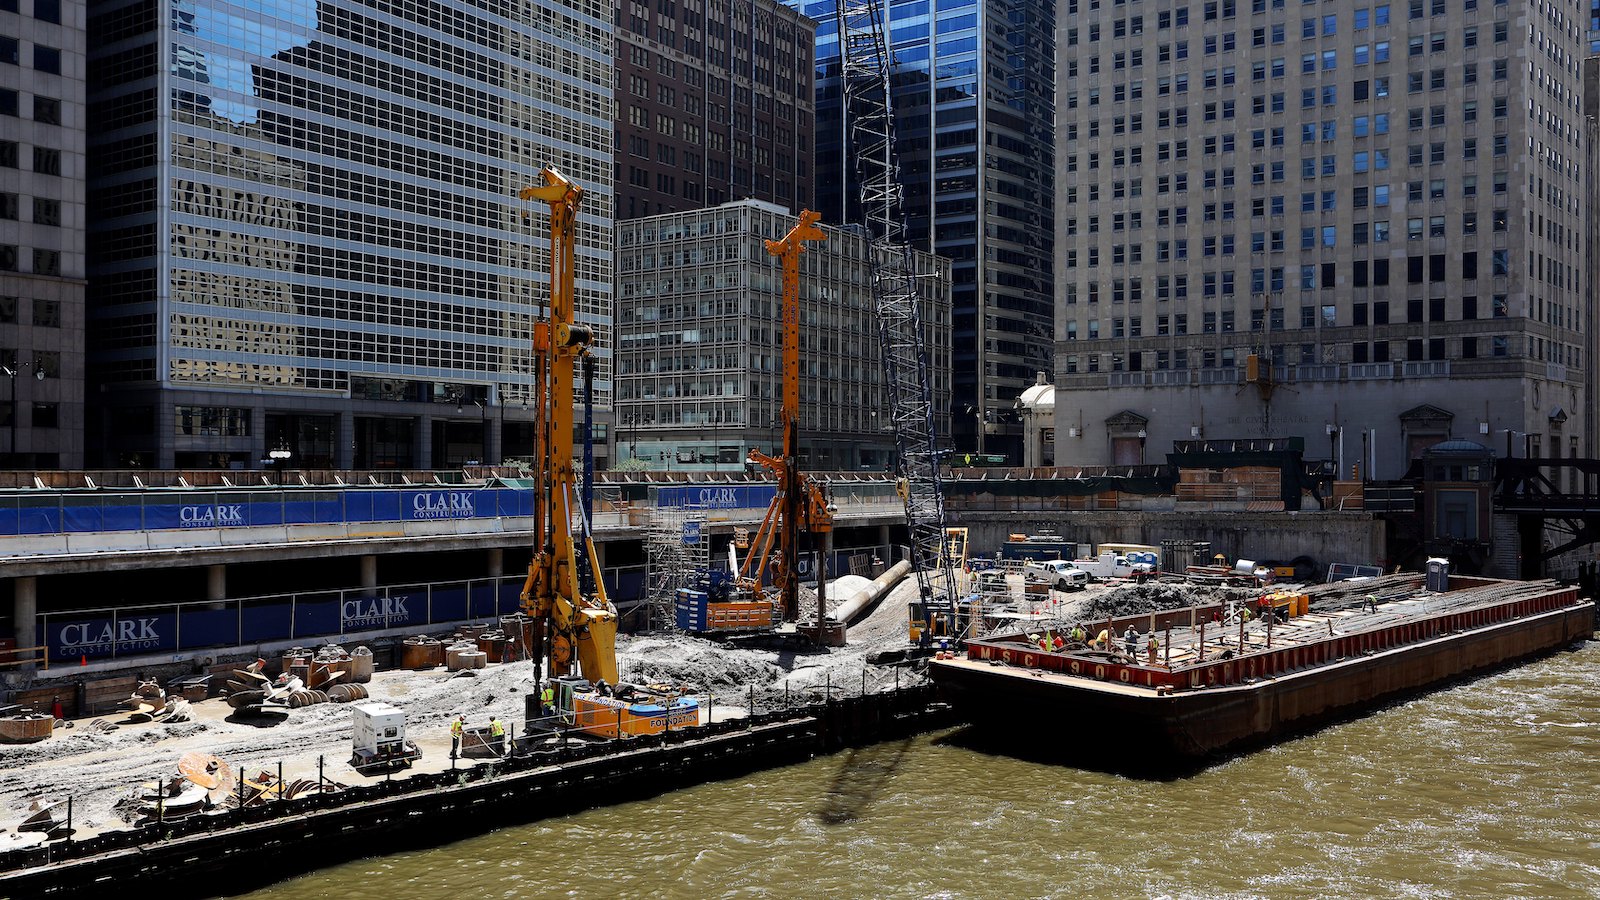 Barges and cranes on Chicago river working on buildings.